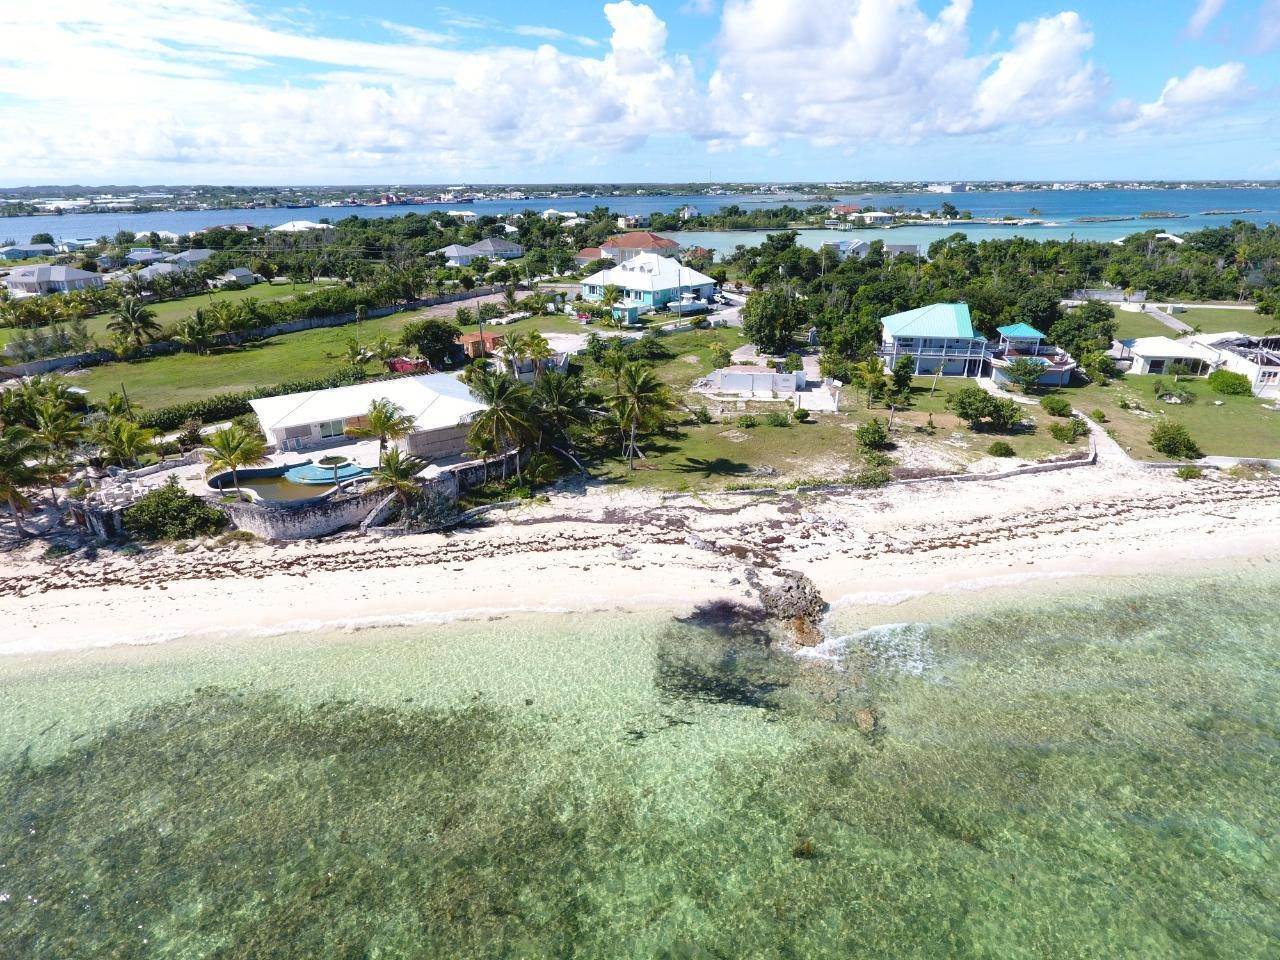 Lots / Acreage for Sale at Pelican Shores, Marsh Harbour, Abaco, Bahamas